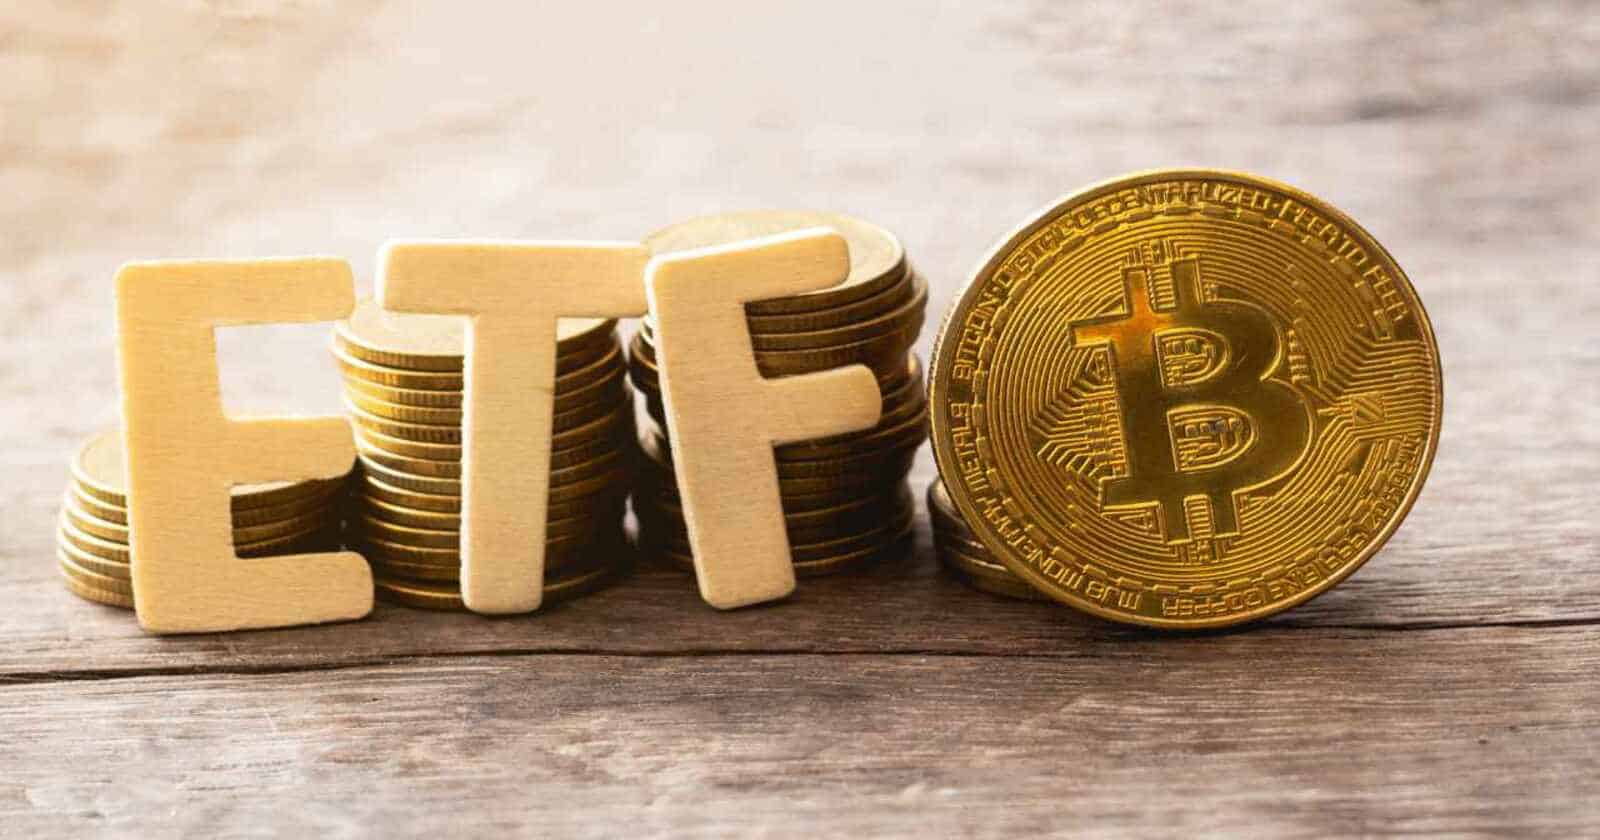 Spot Bitcoin ETFs May Lure Billions From Other Crypto Products, JPMorgan Says